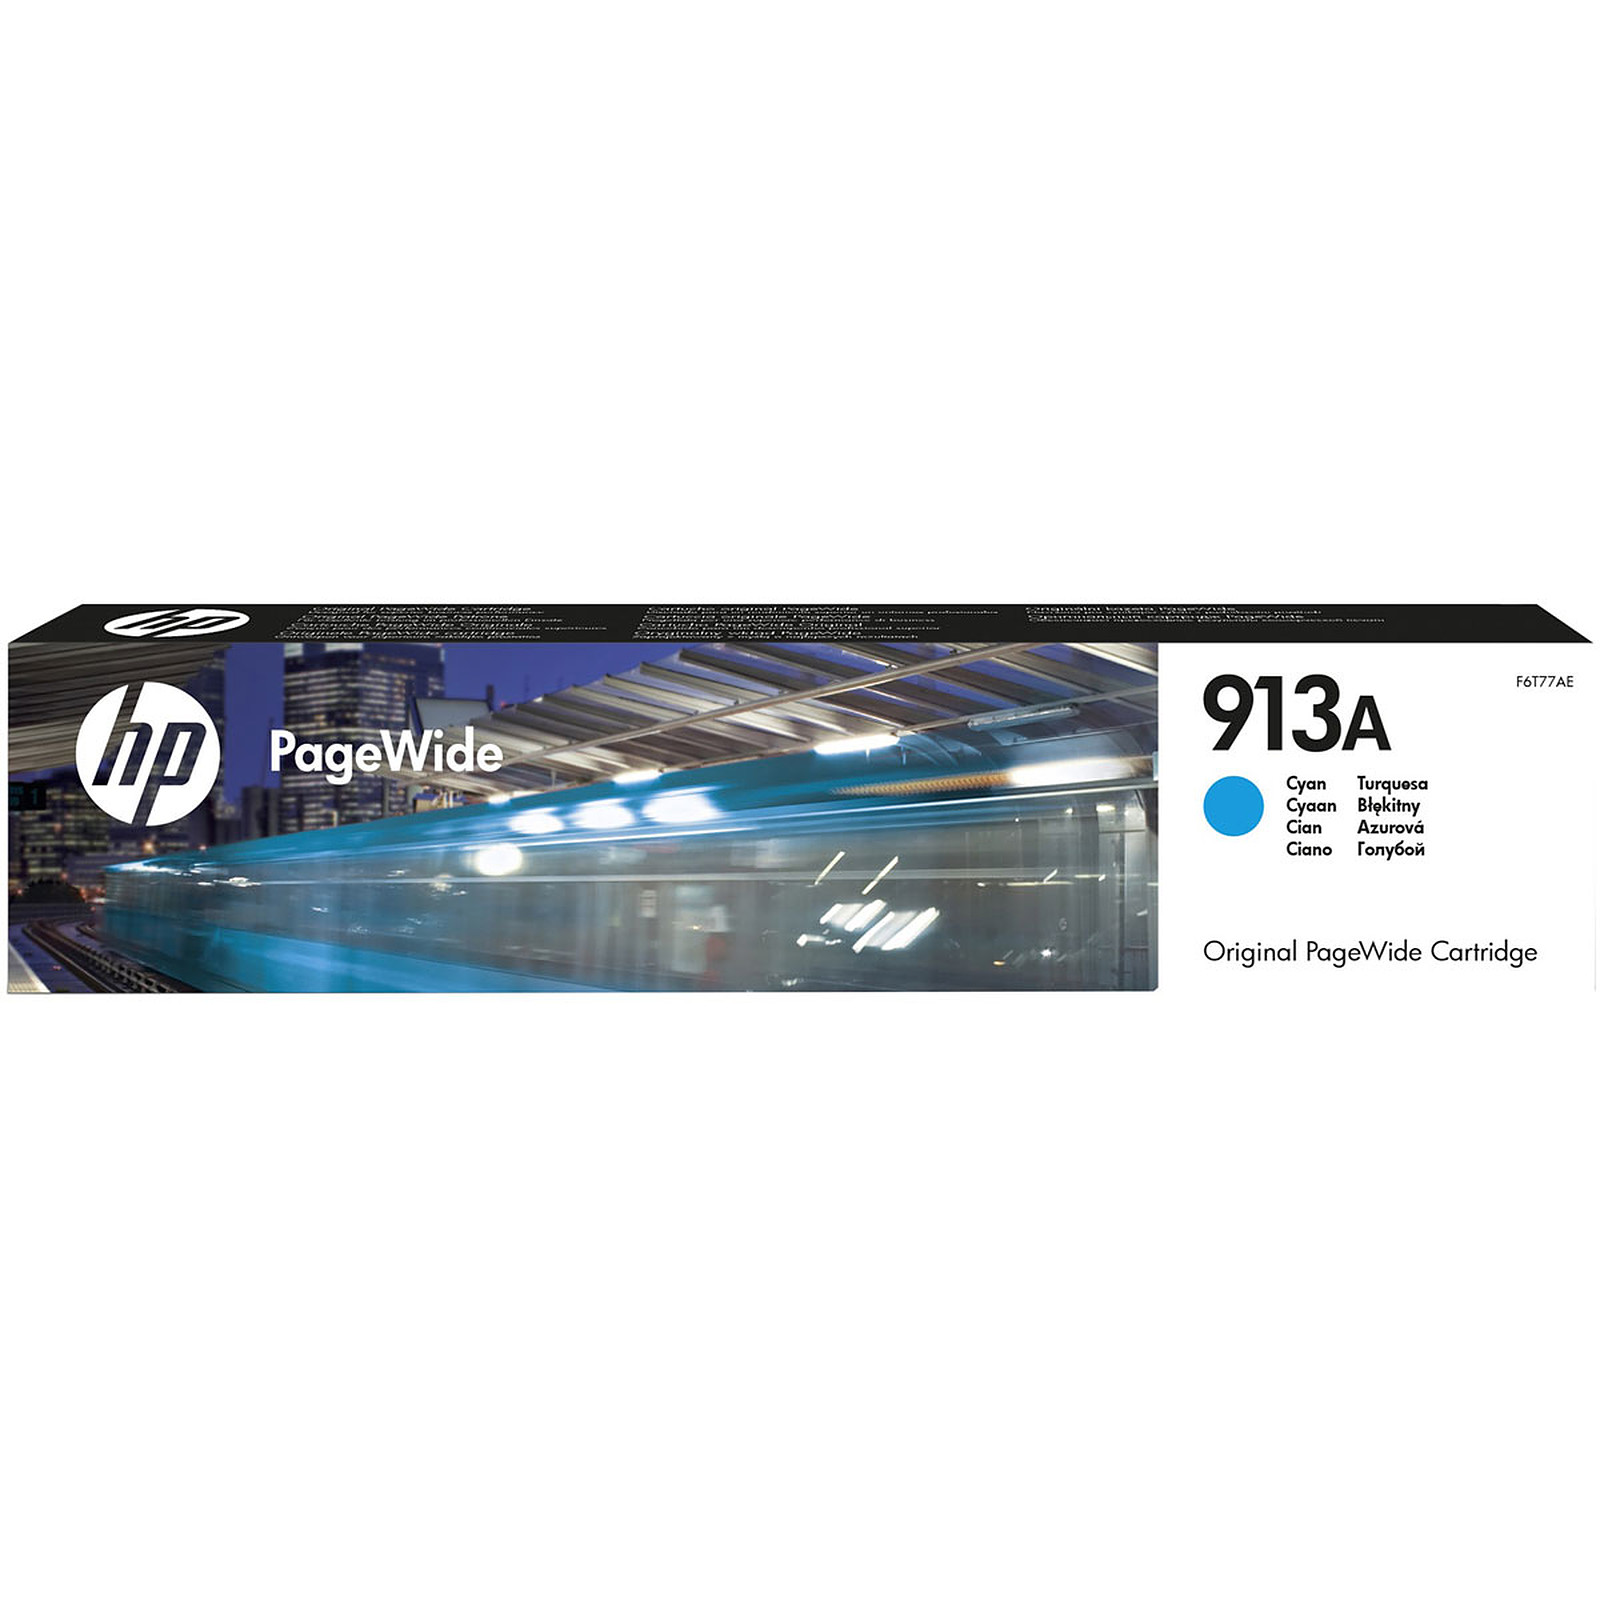 HP PageWide 913A (F6T77AE) - Cyan - Cartouche imprimante HP